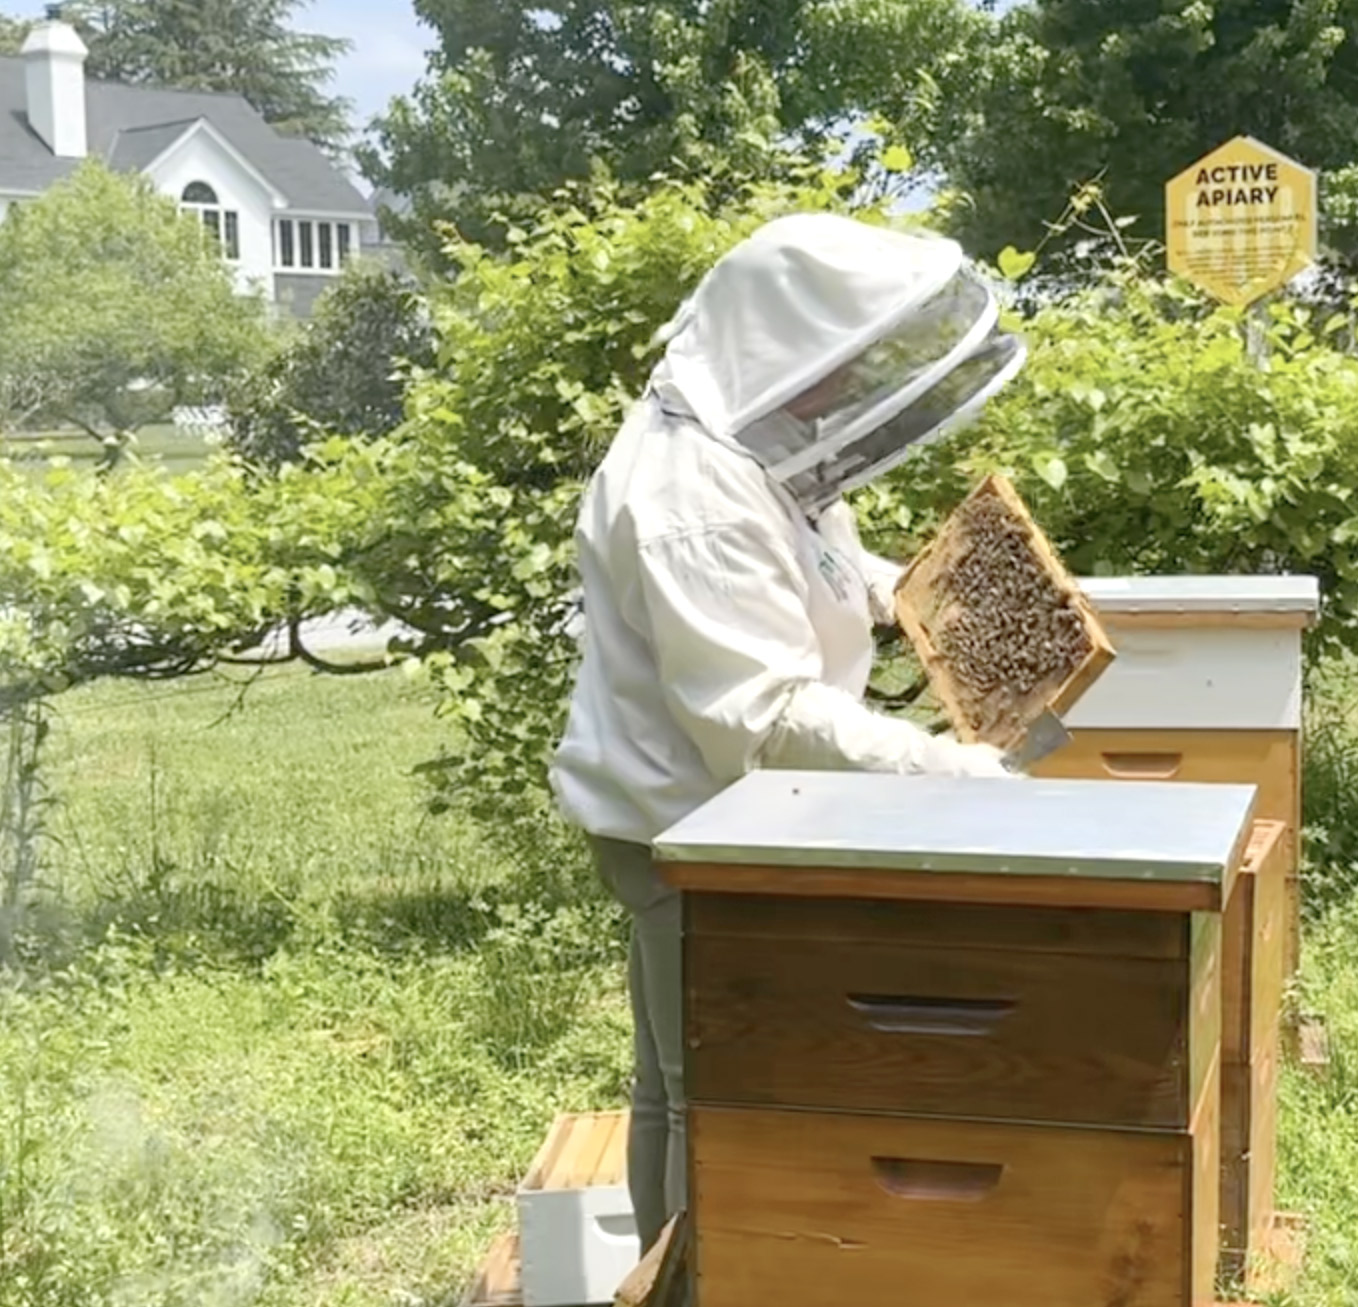 A person wearing protective beekeeping gear inspects a frame from a beehive in a grassy area. Nearby, there is a yellow sign that reads "Active Apiary." Trees and a house can be seen in the background. Fearrington Village